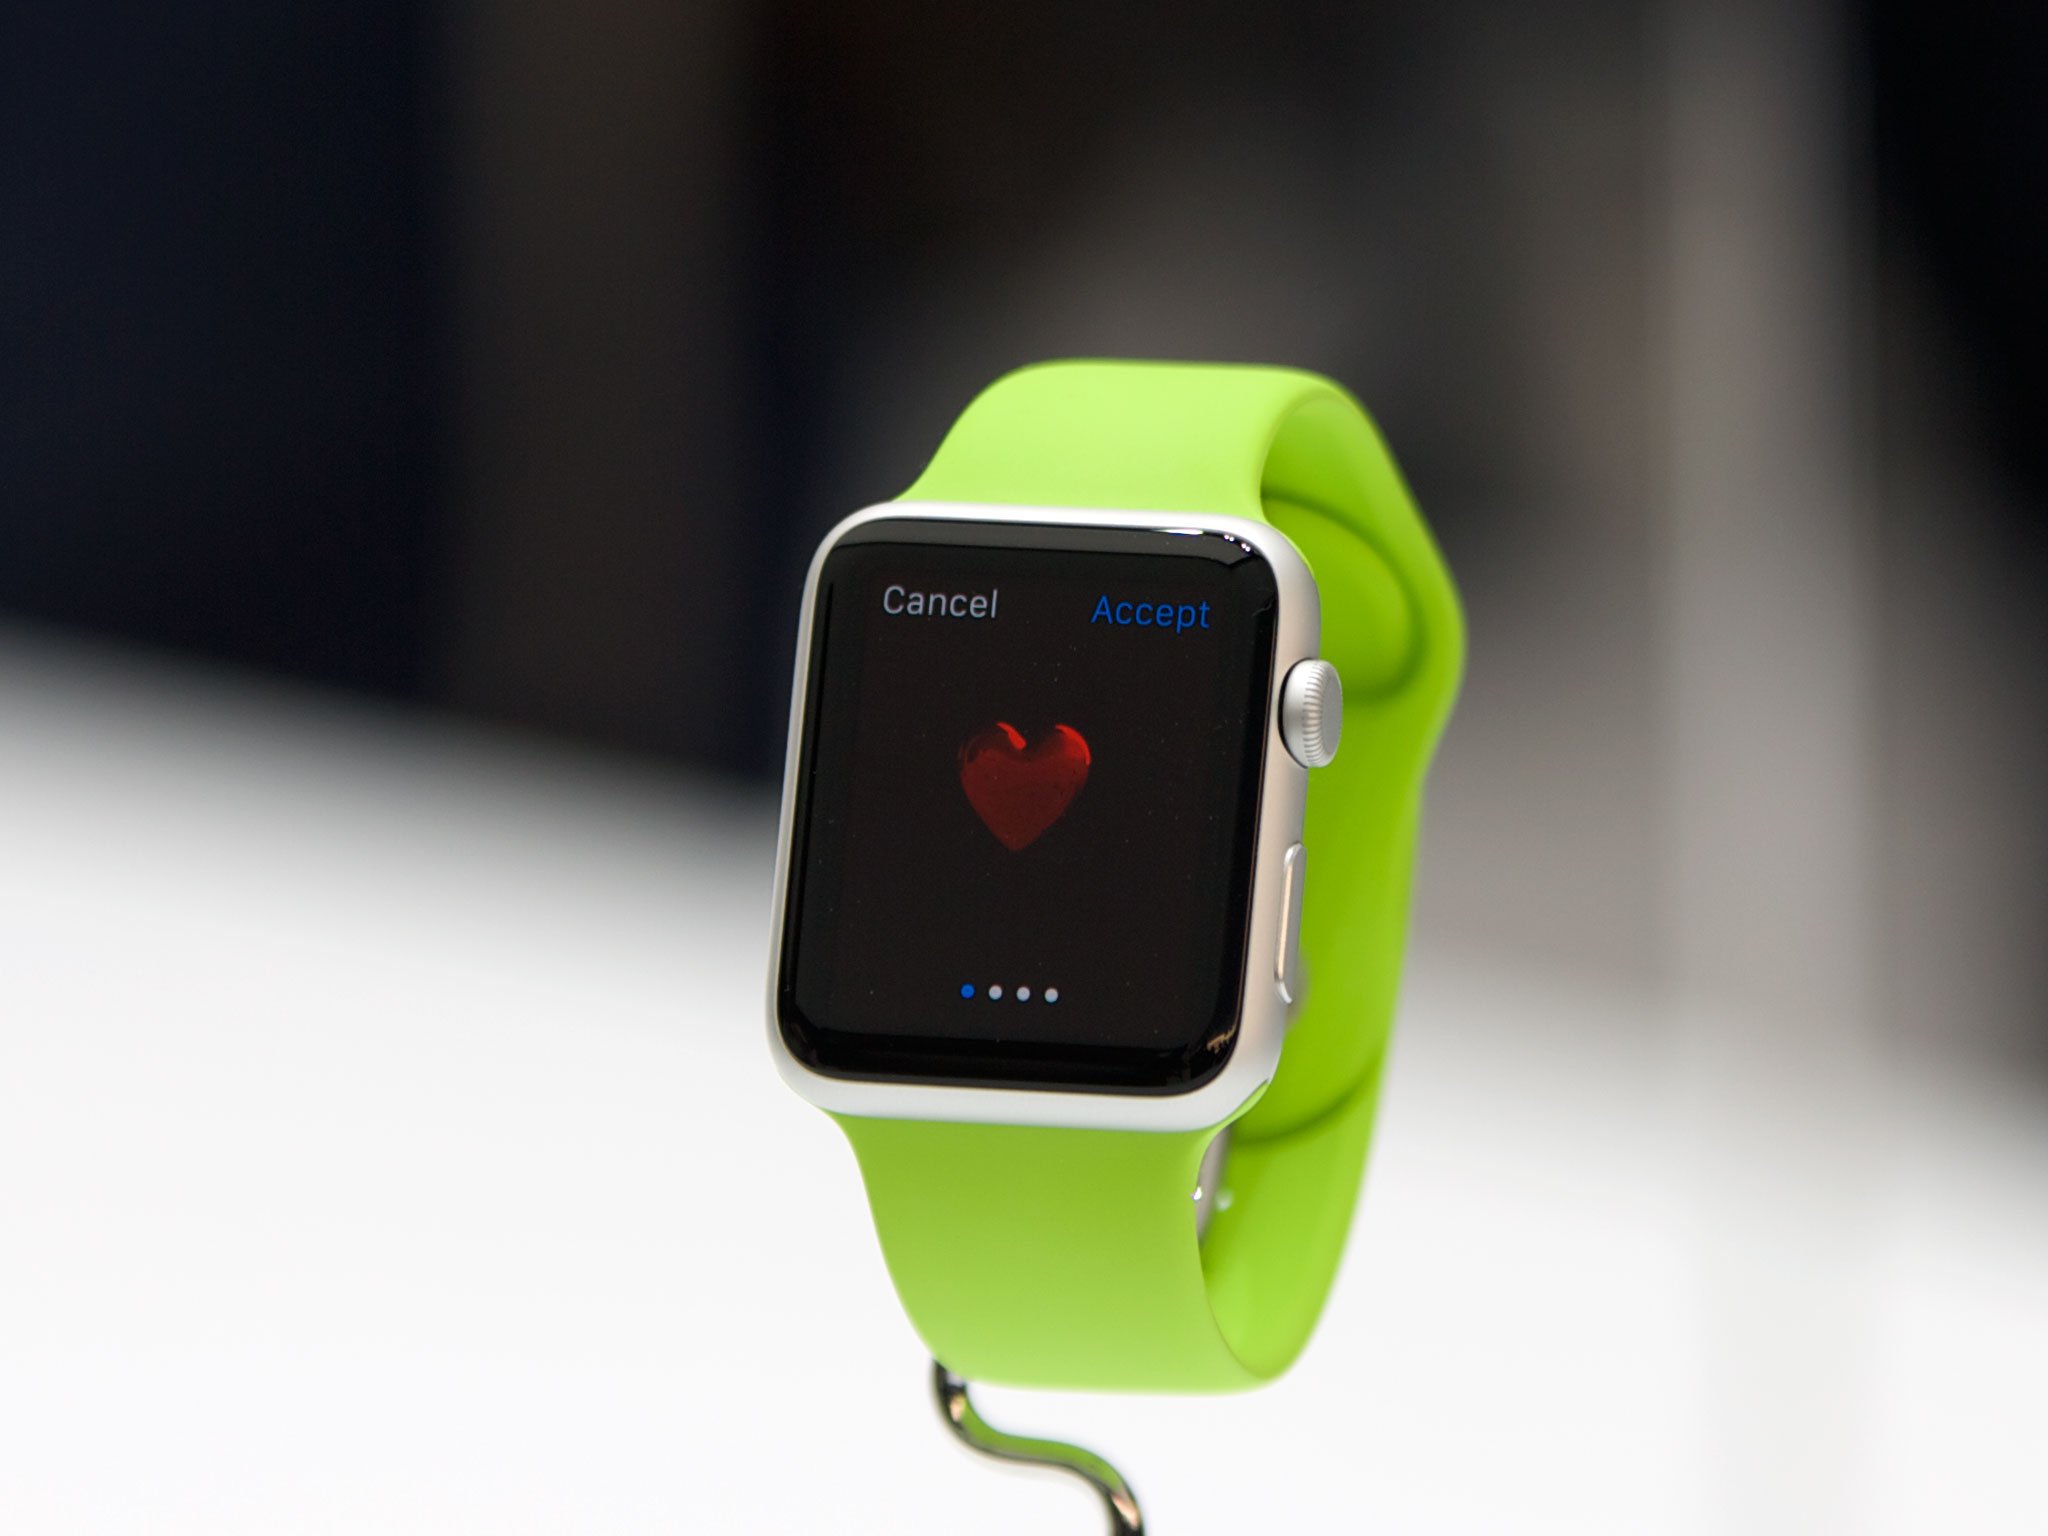 The Apple Watch isn't going to give you cancer, but bad reporting is going to make us dumber